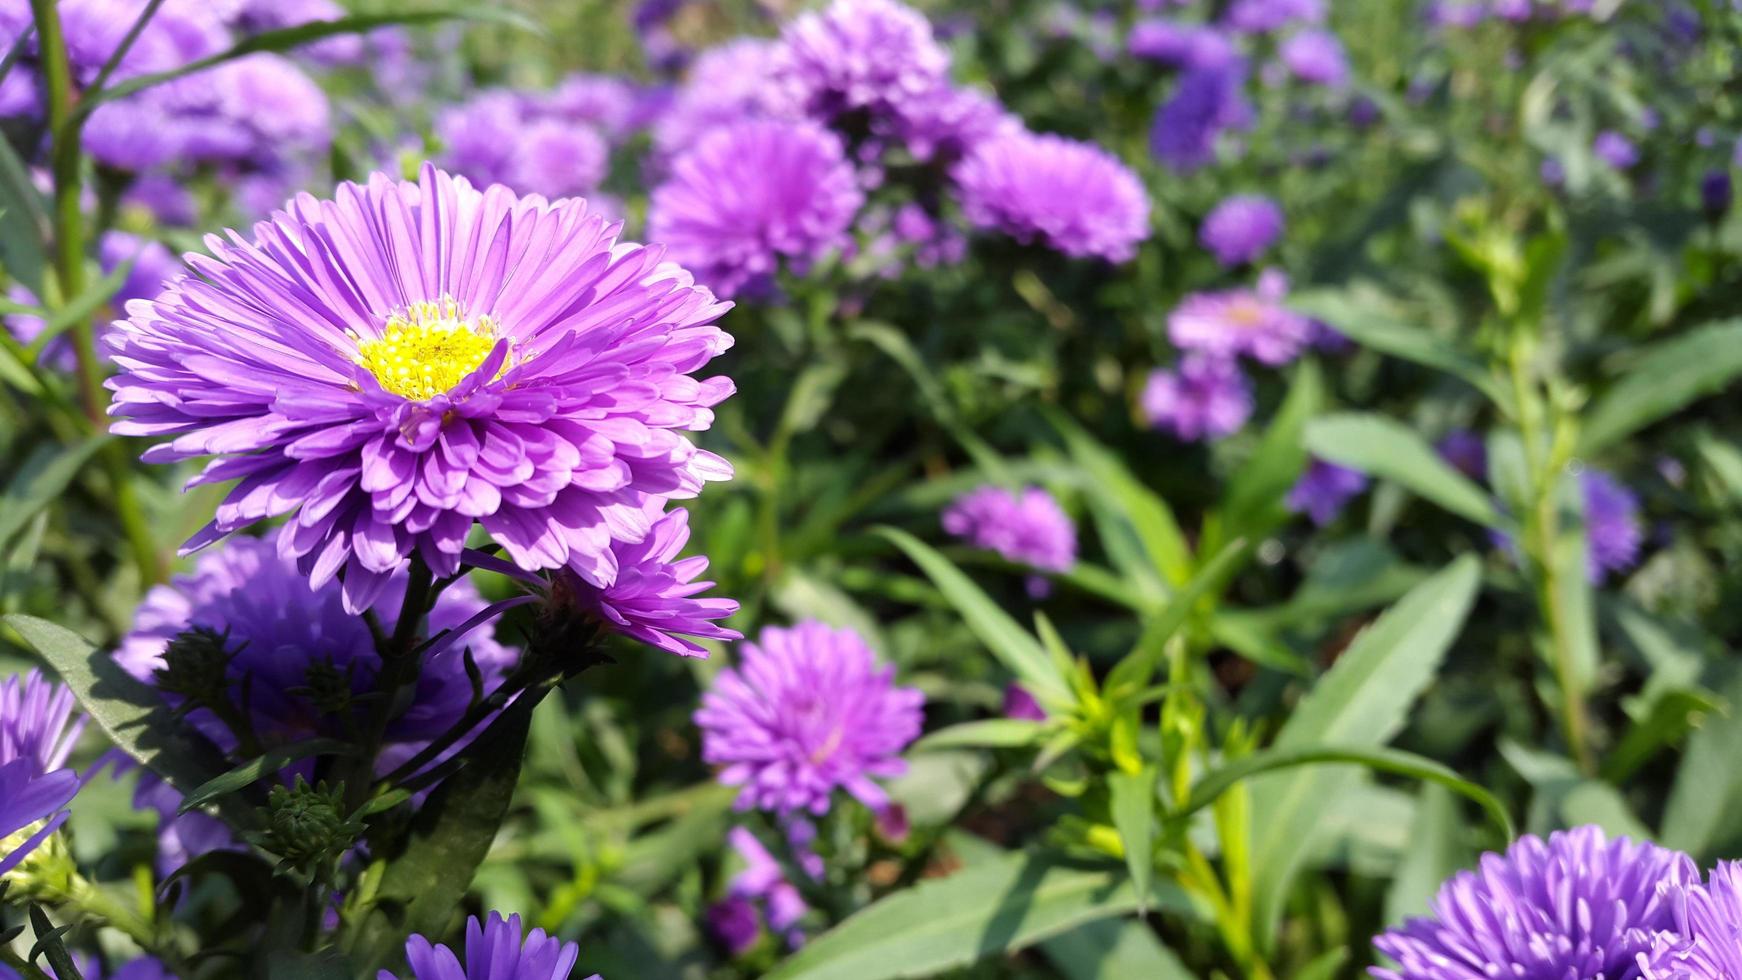 Aster Amellus Flower with purple colour photo